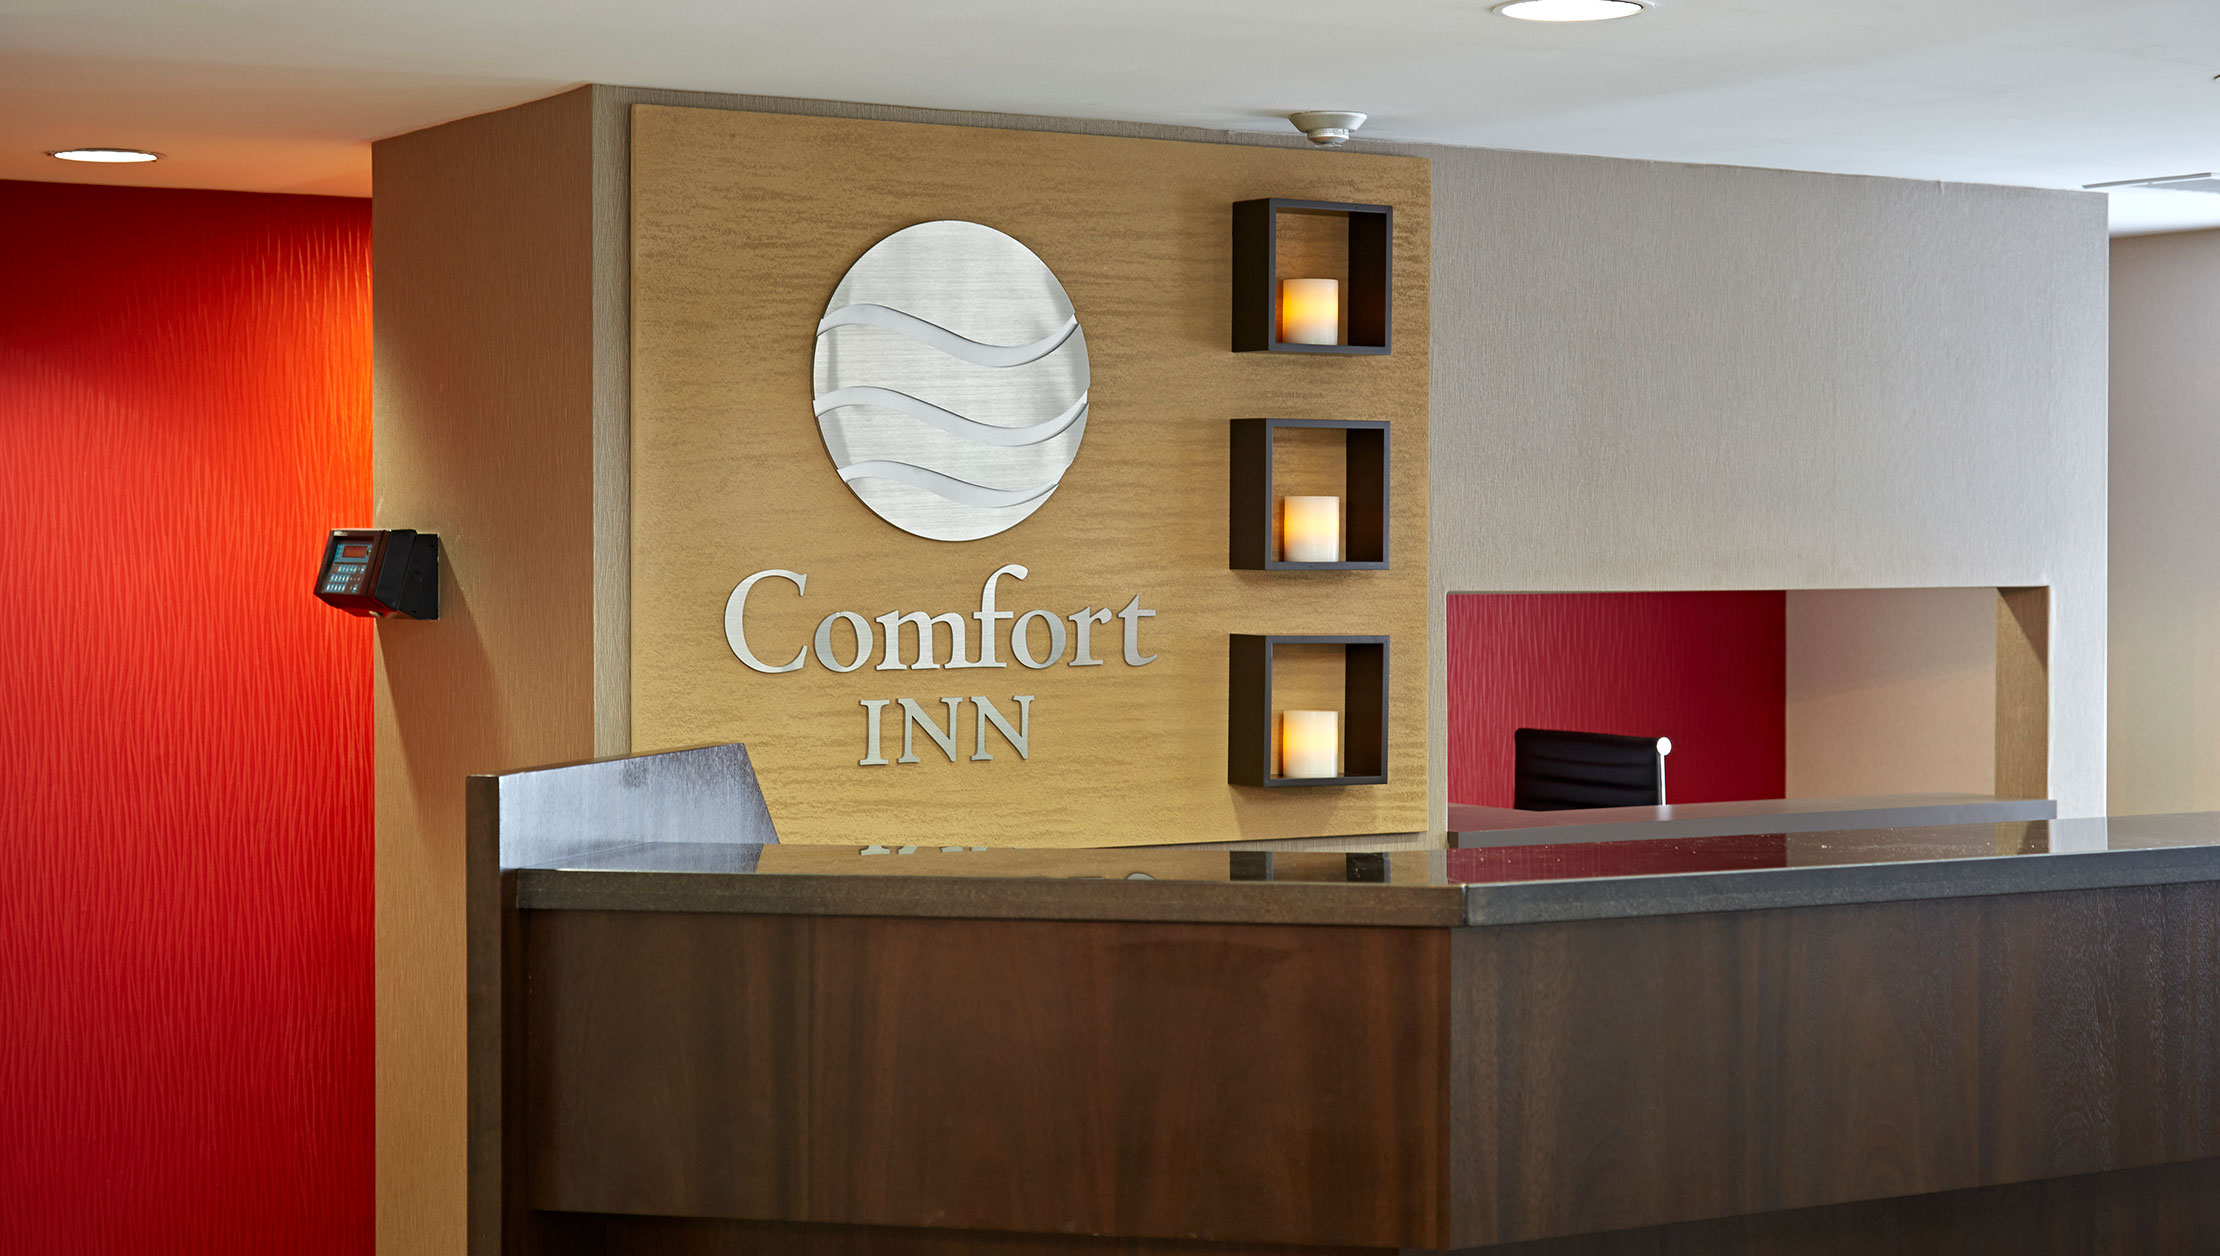 InnVest Hotels selects preferred technology provider